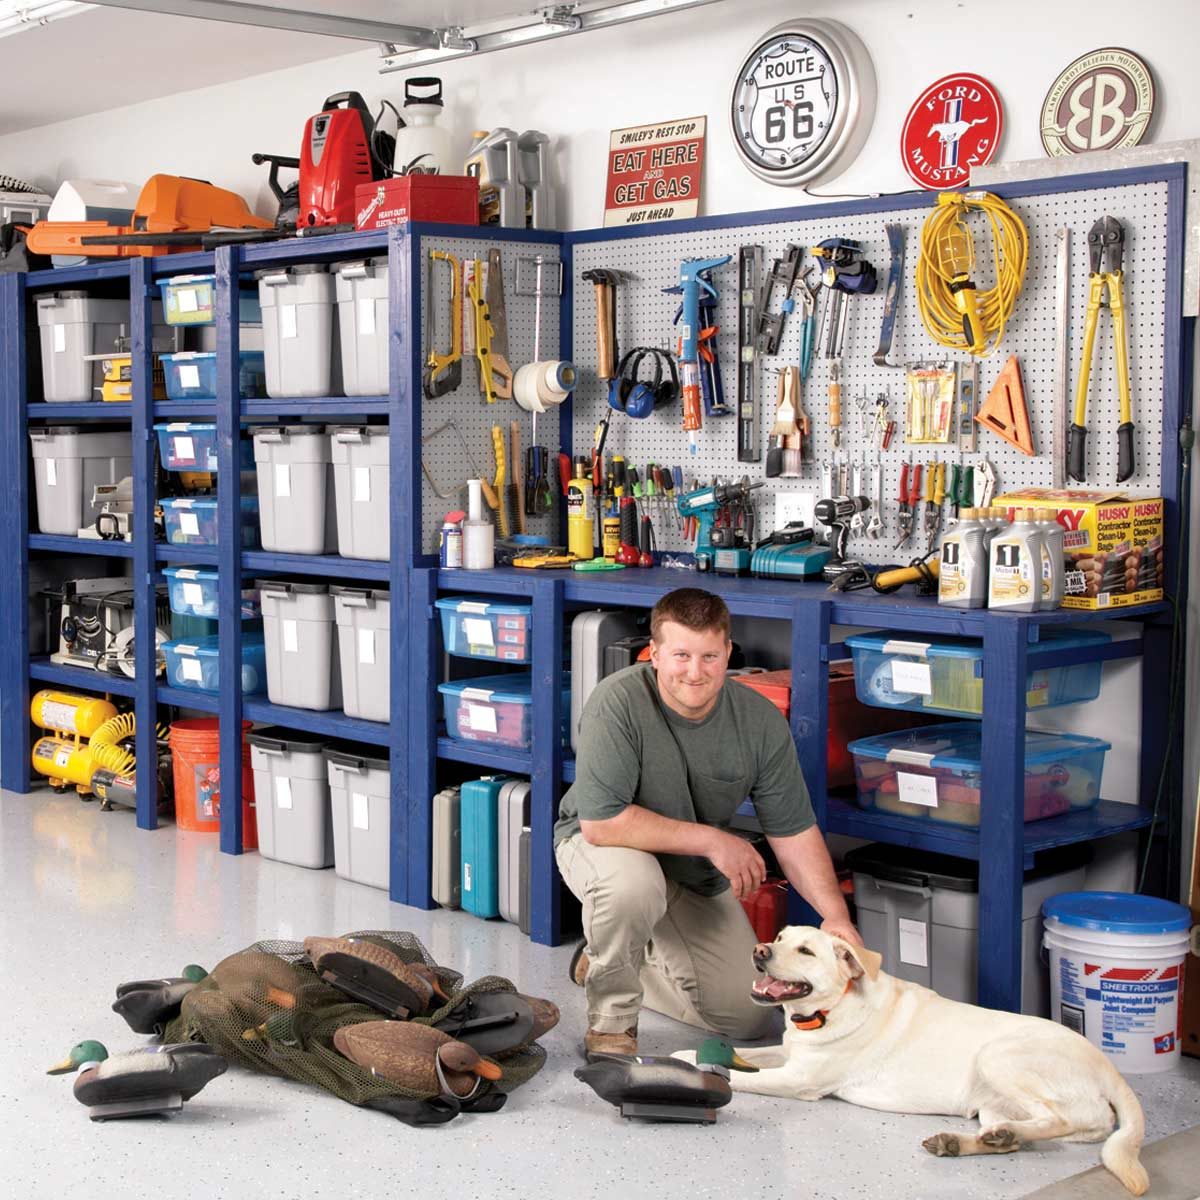 24 DIY Garage Storage Projects That Save Space and Money